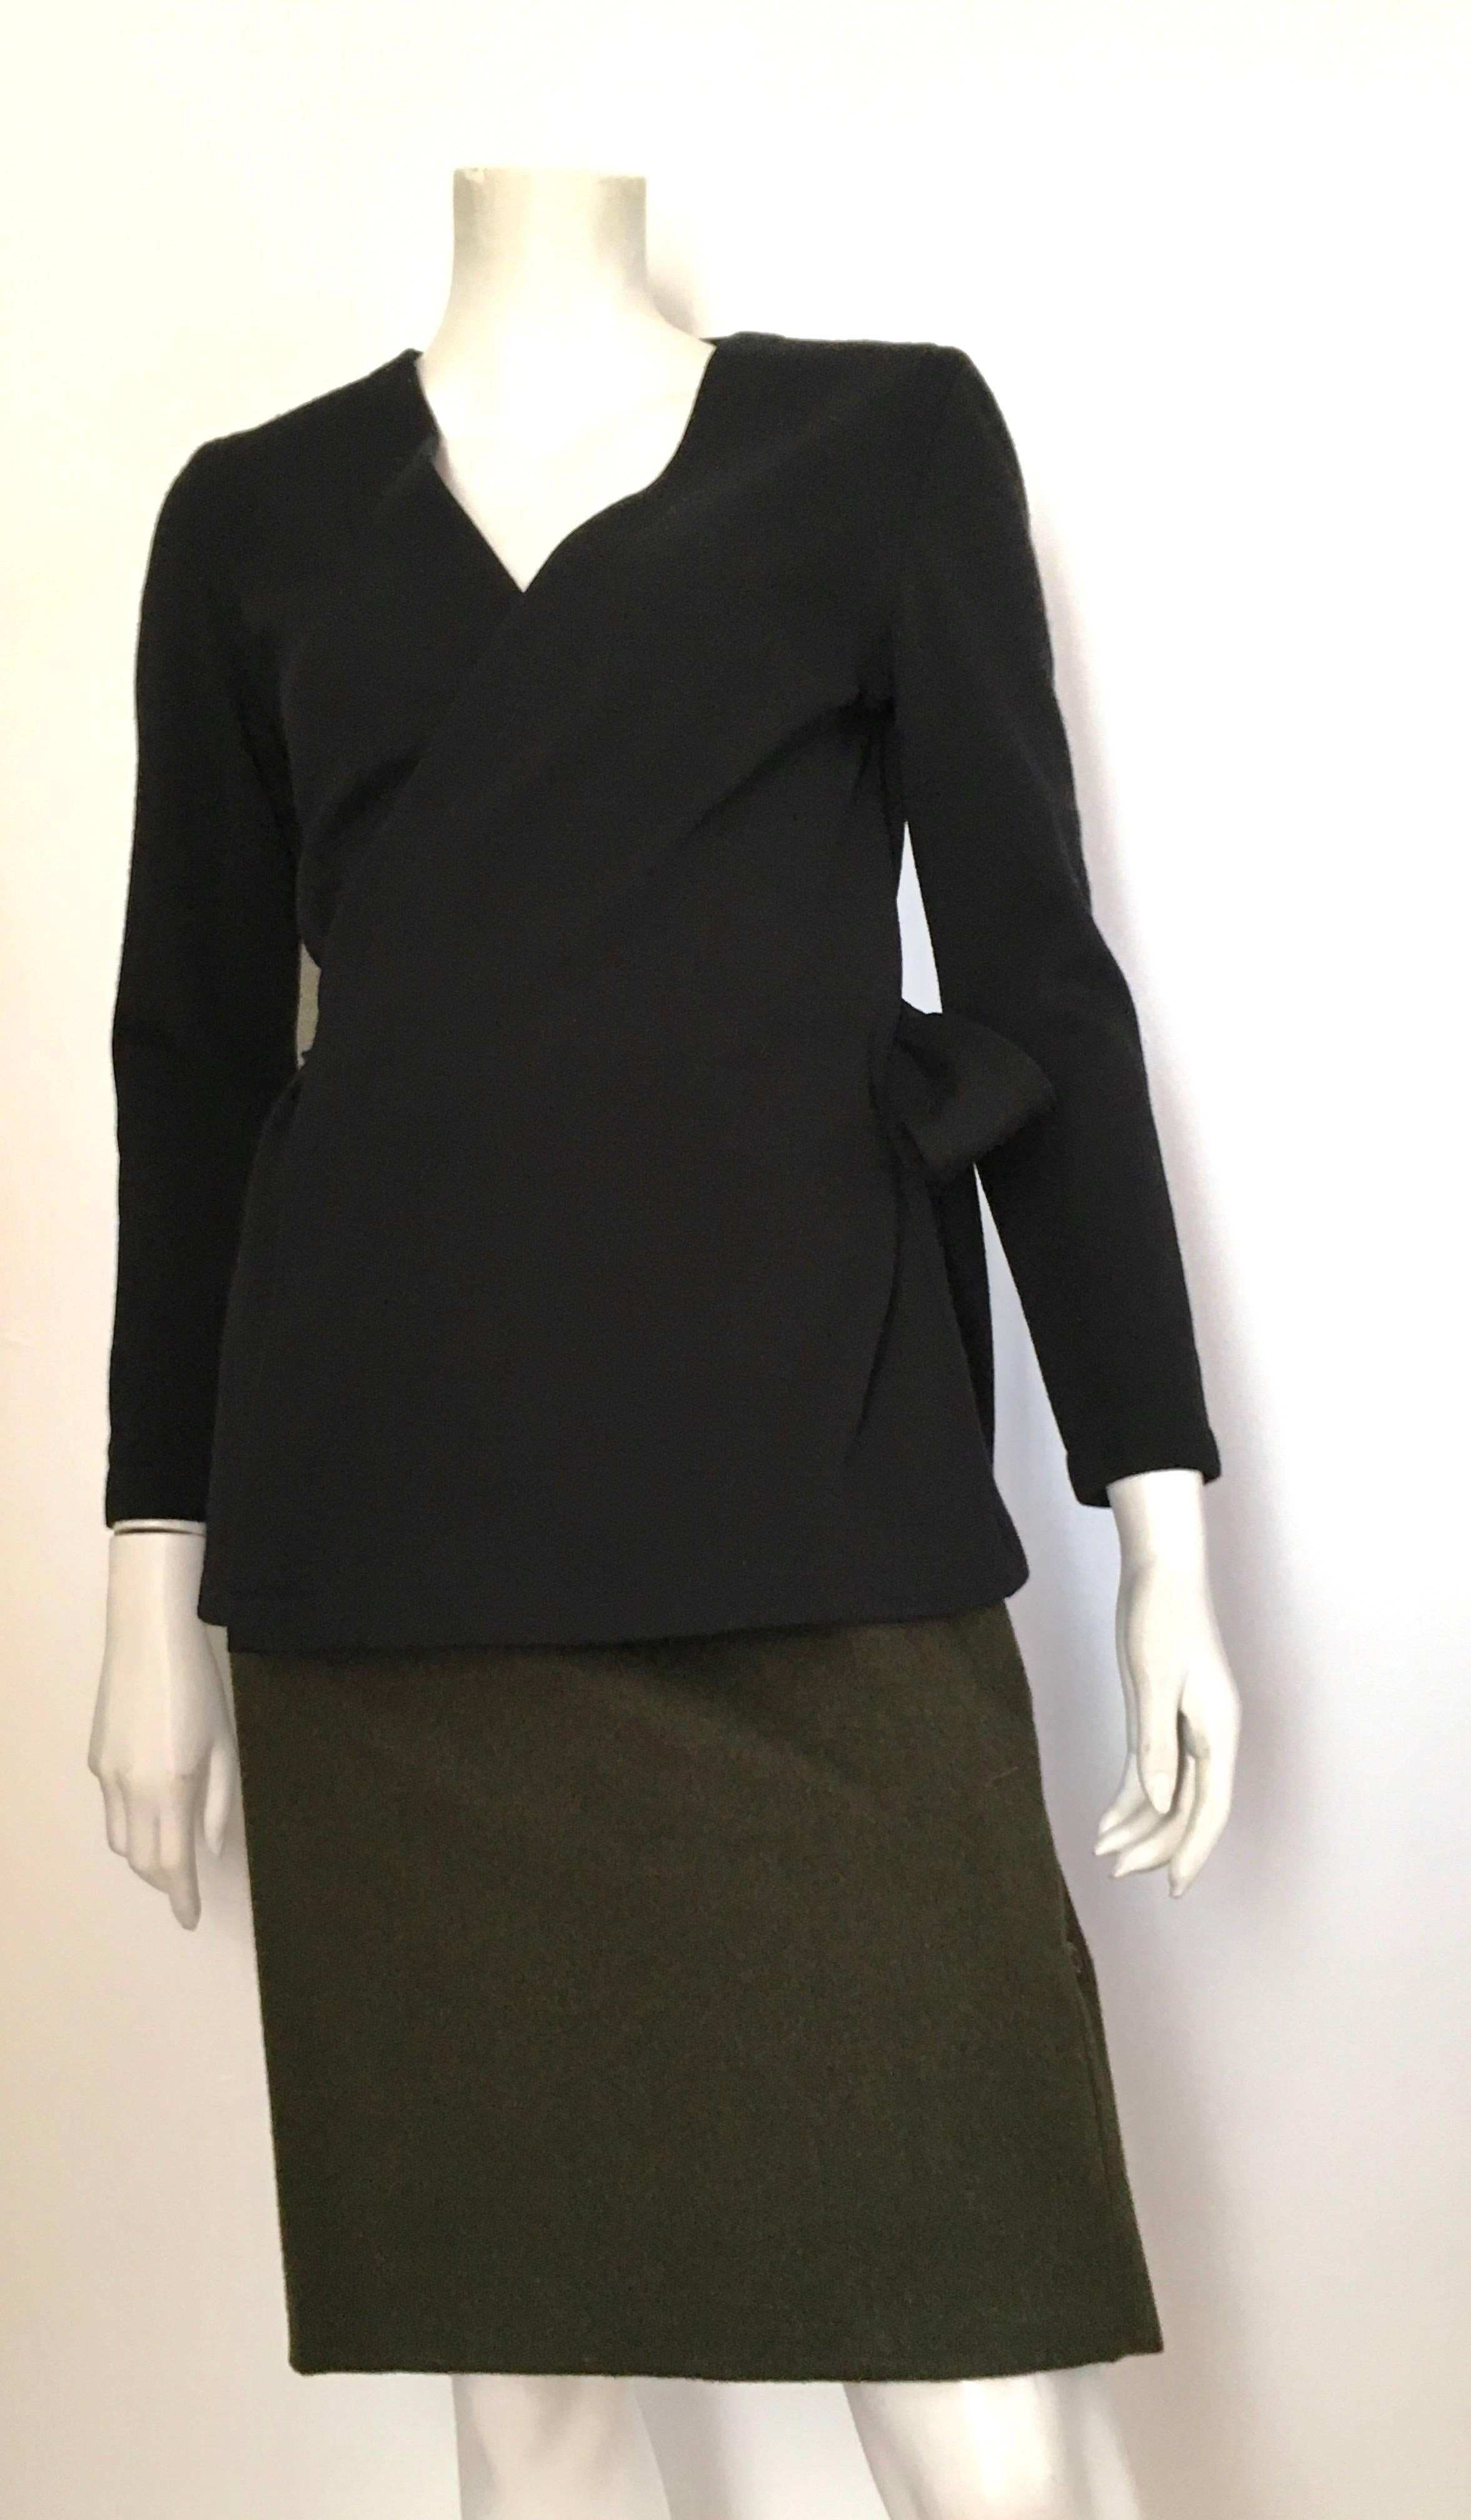 Tom and Linda Platt for Saks Fifth Avenue 1980s black wool wrap jacket is a size petite. Knit wool fabric. Not lined. Wear this black wrap jacket with your vintage Calvin Klein jeans or your classic Chanel pants and watch the paparazzi go mad. 